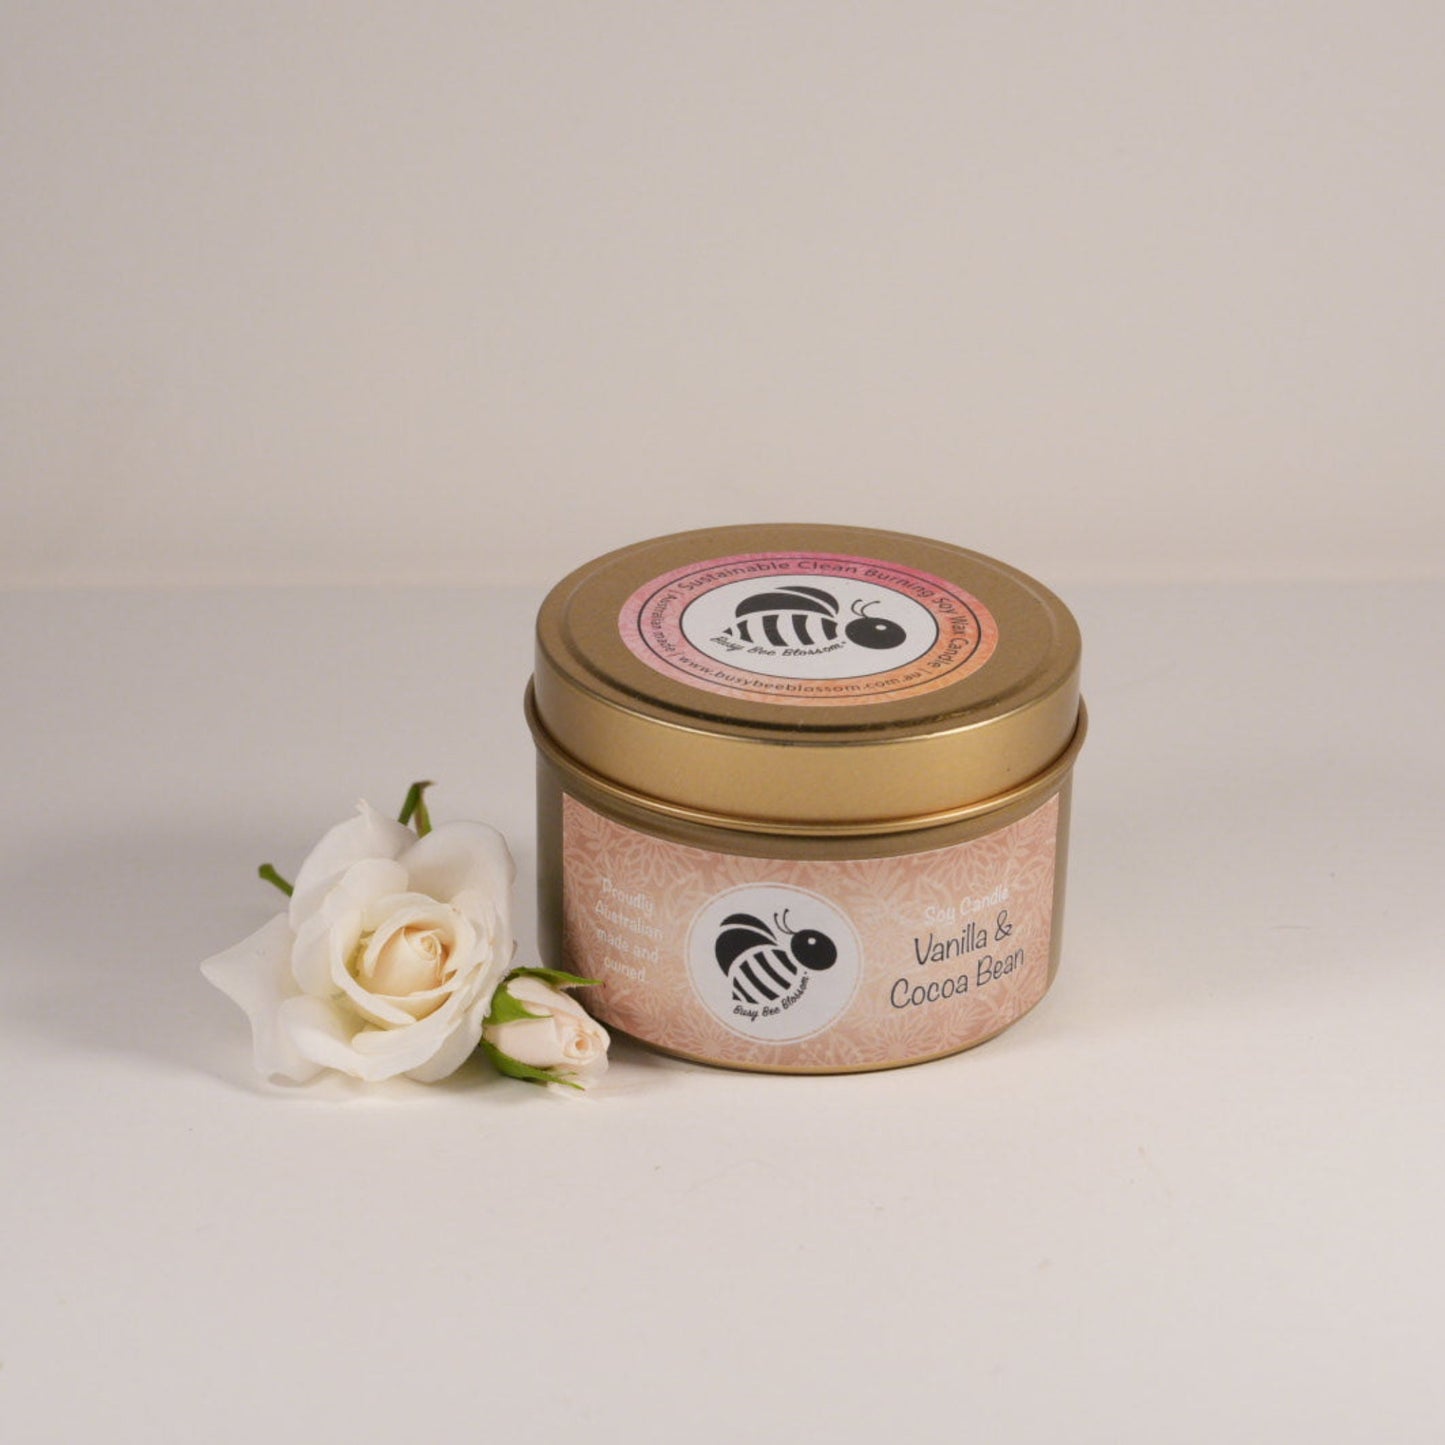 Vanilla and Cocoa Gold Travel Tin Soy Candle with roses